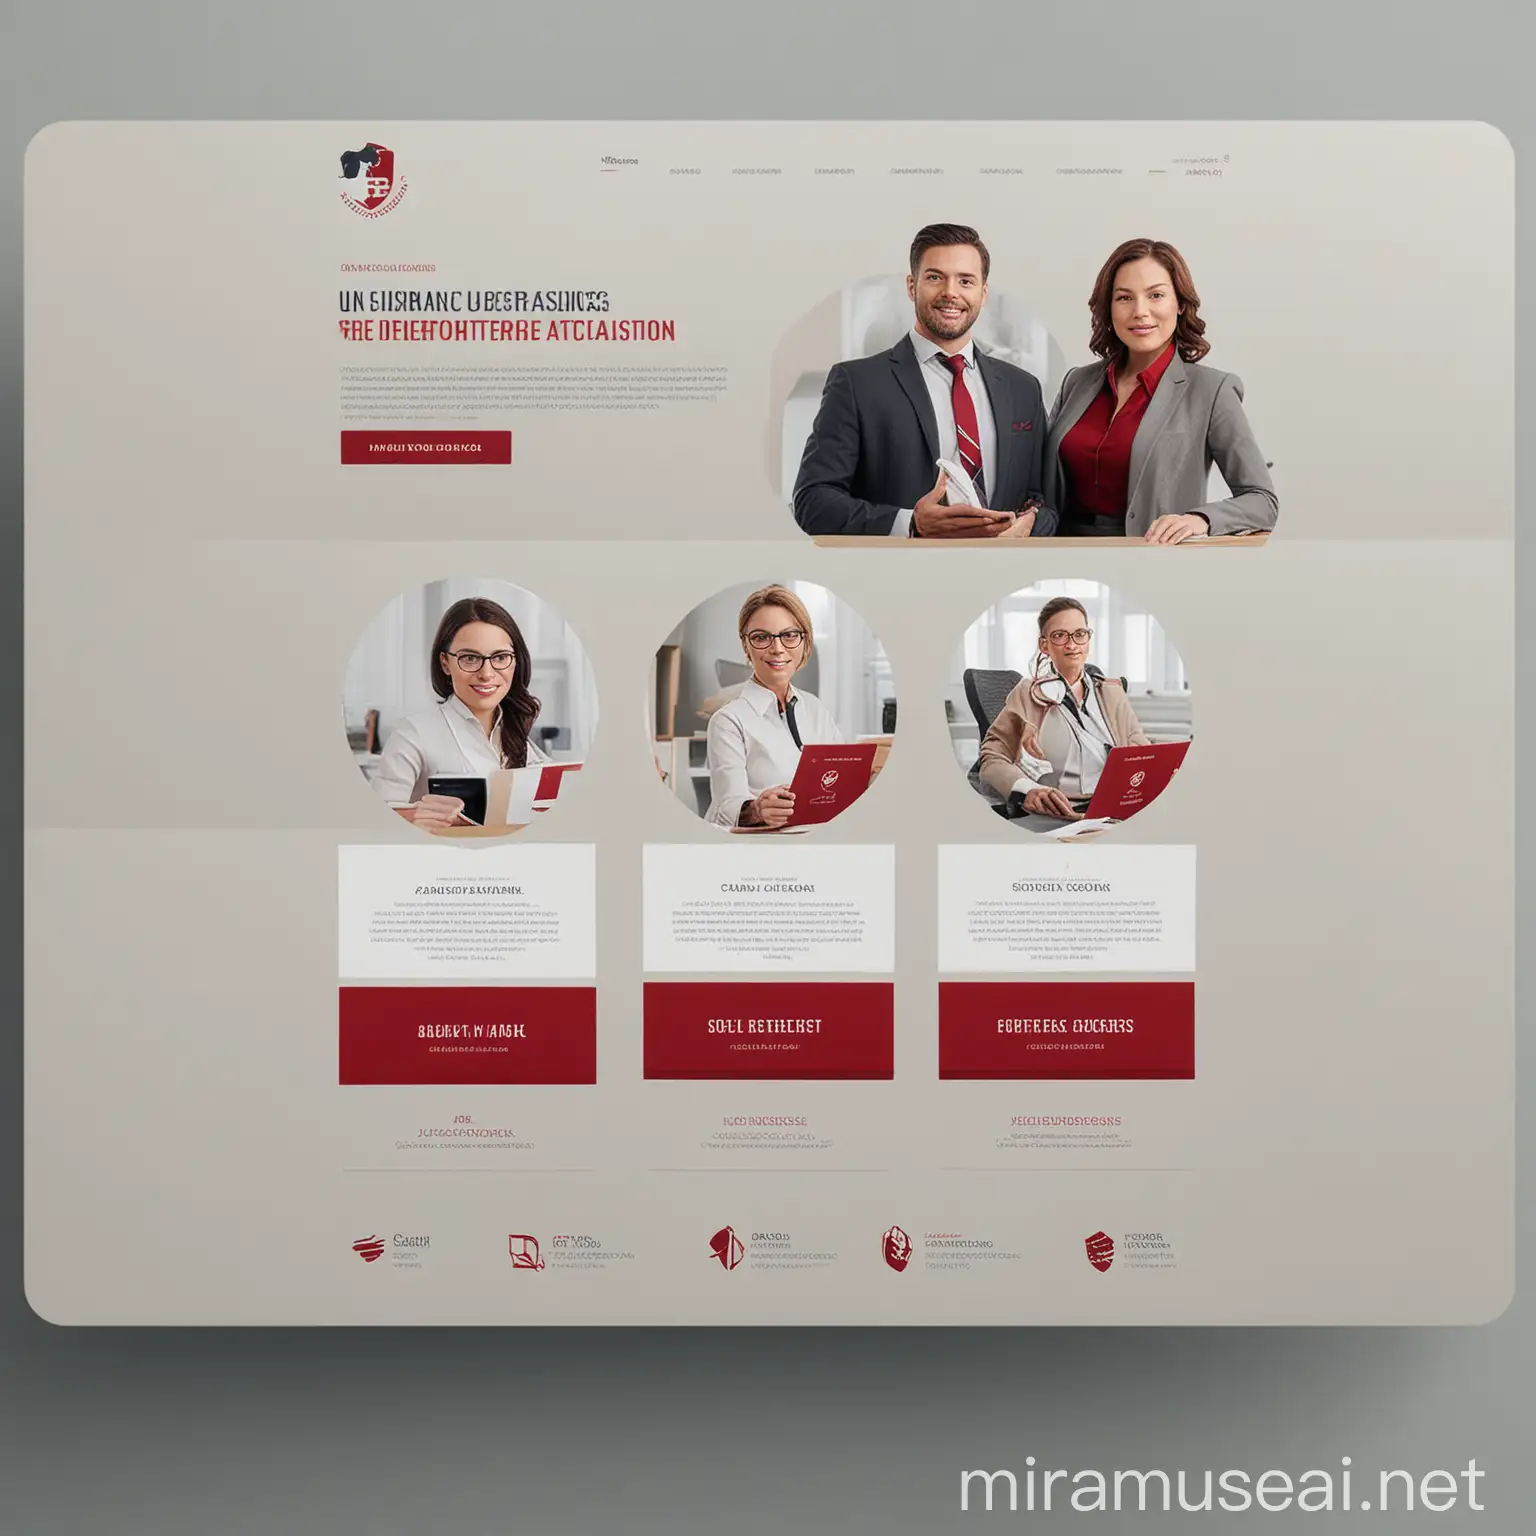 Elegant Insurance Counselors Association Landing Page Design in Light Gray and Dark Red Palette